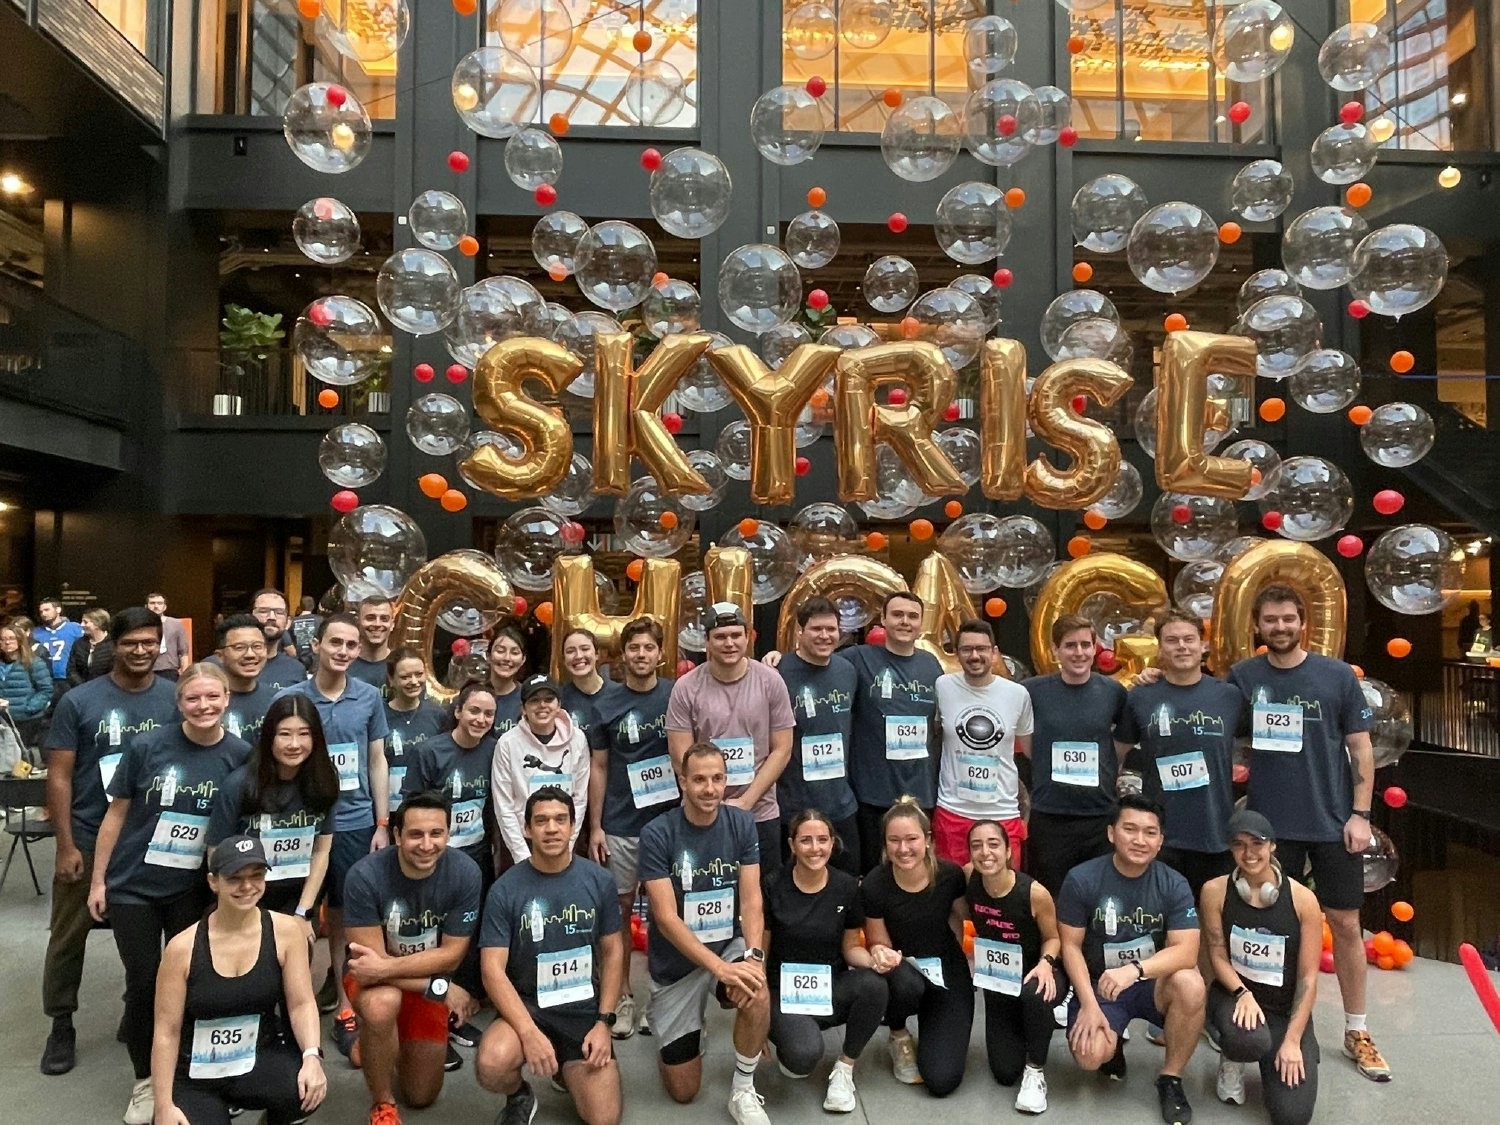 Revantage stepped up to the SkyRise challenge, climbing all 105 floors of Willis Tower for Shirley Ryan AbilityLab.